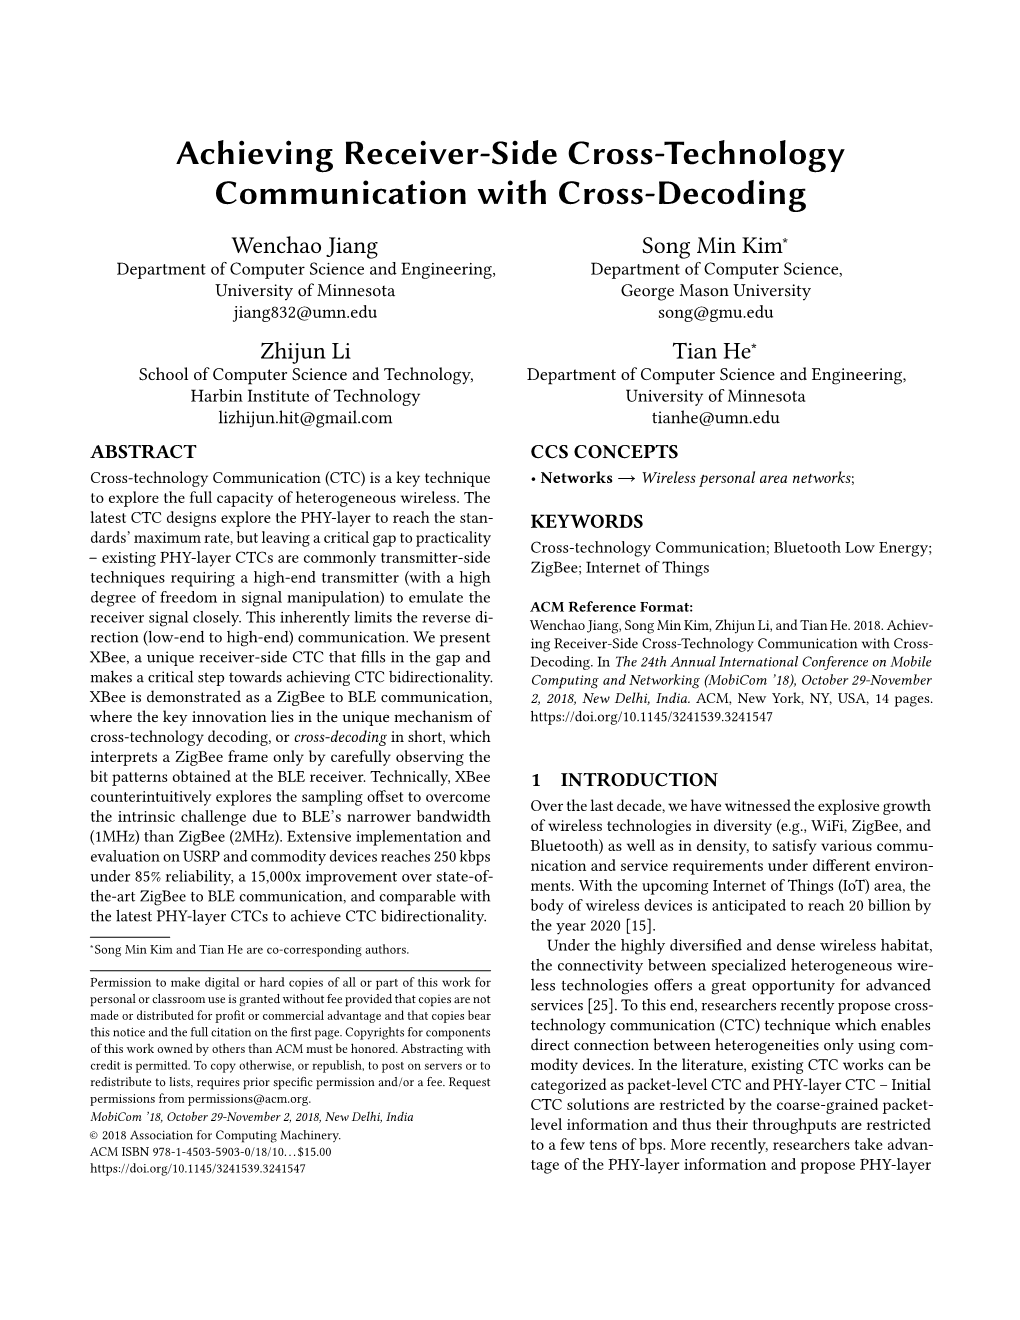 Achieving Receiver-Side Cross-Technology Communication